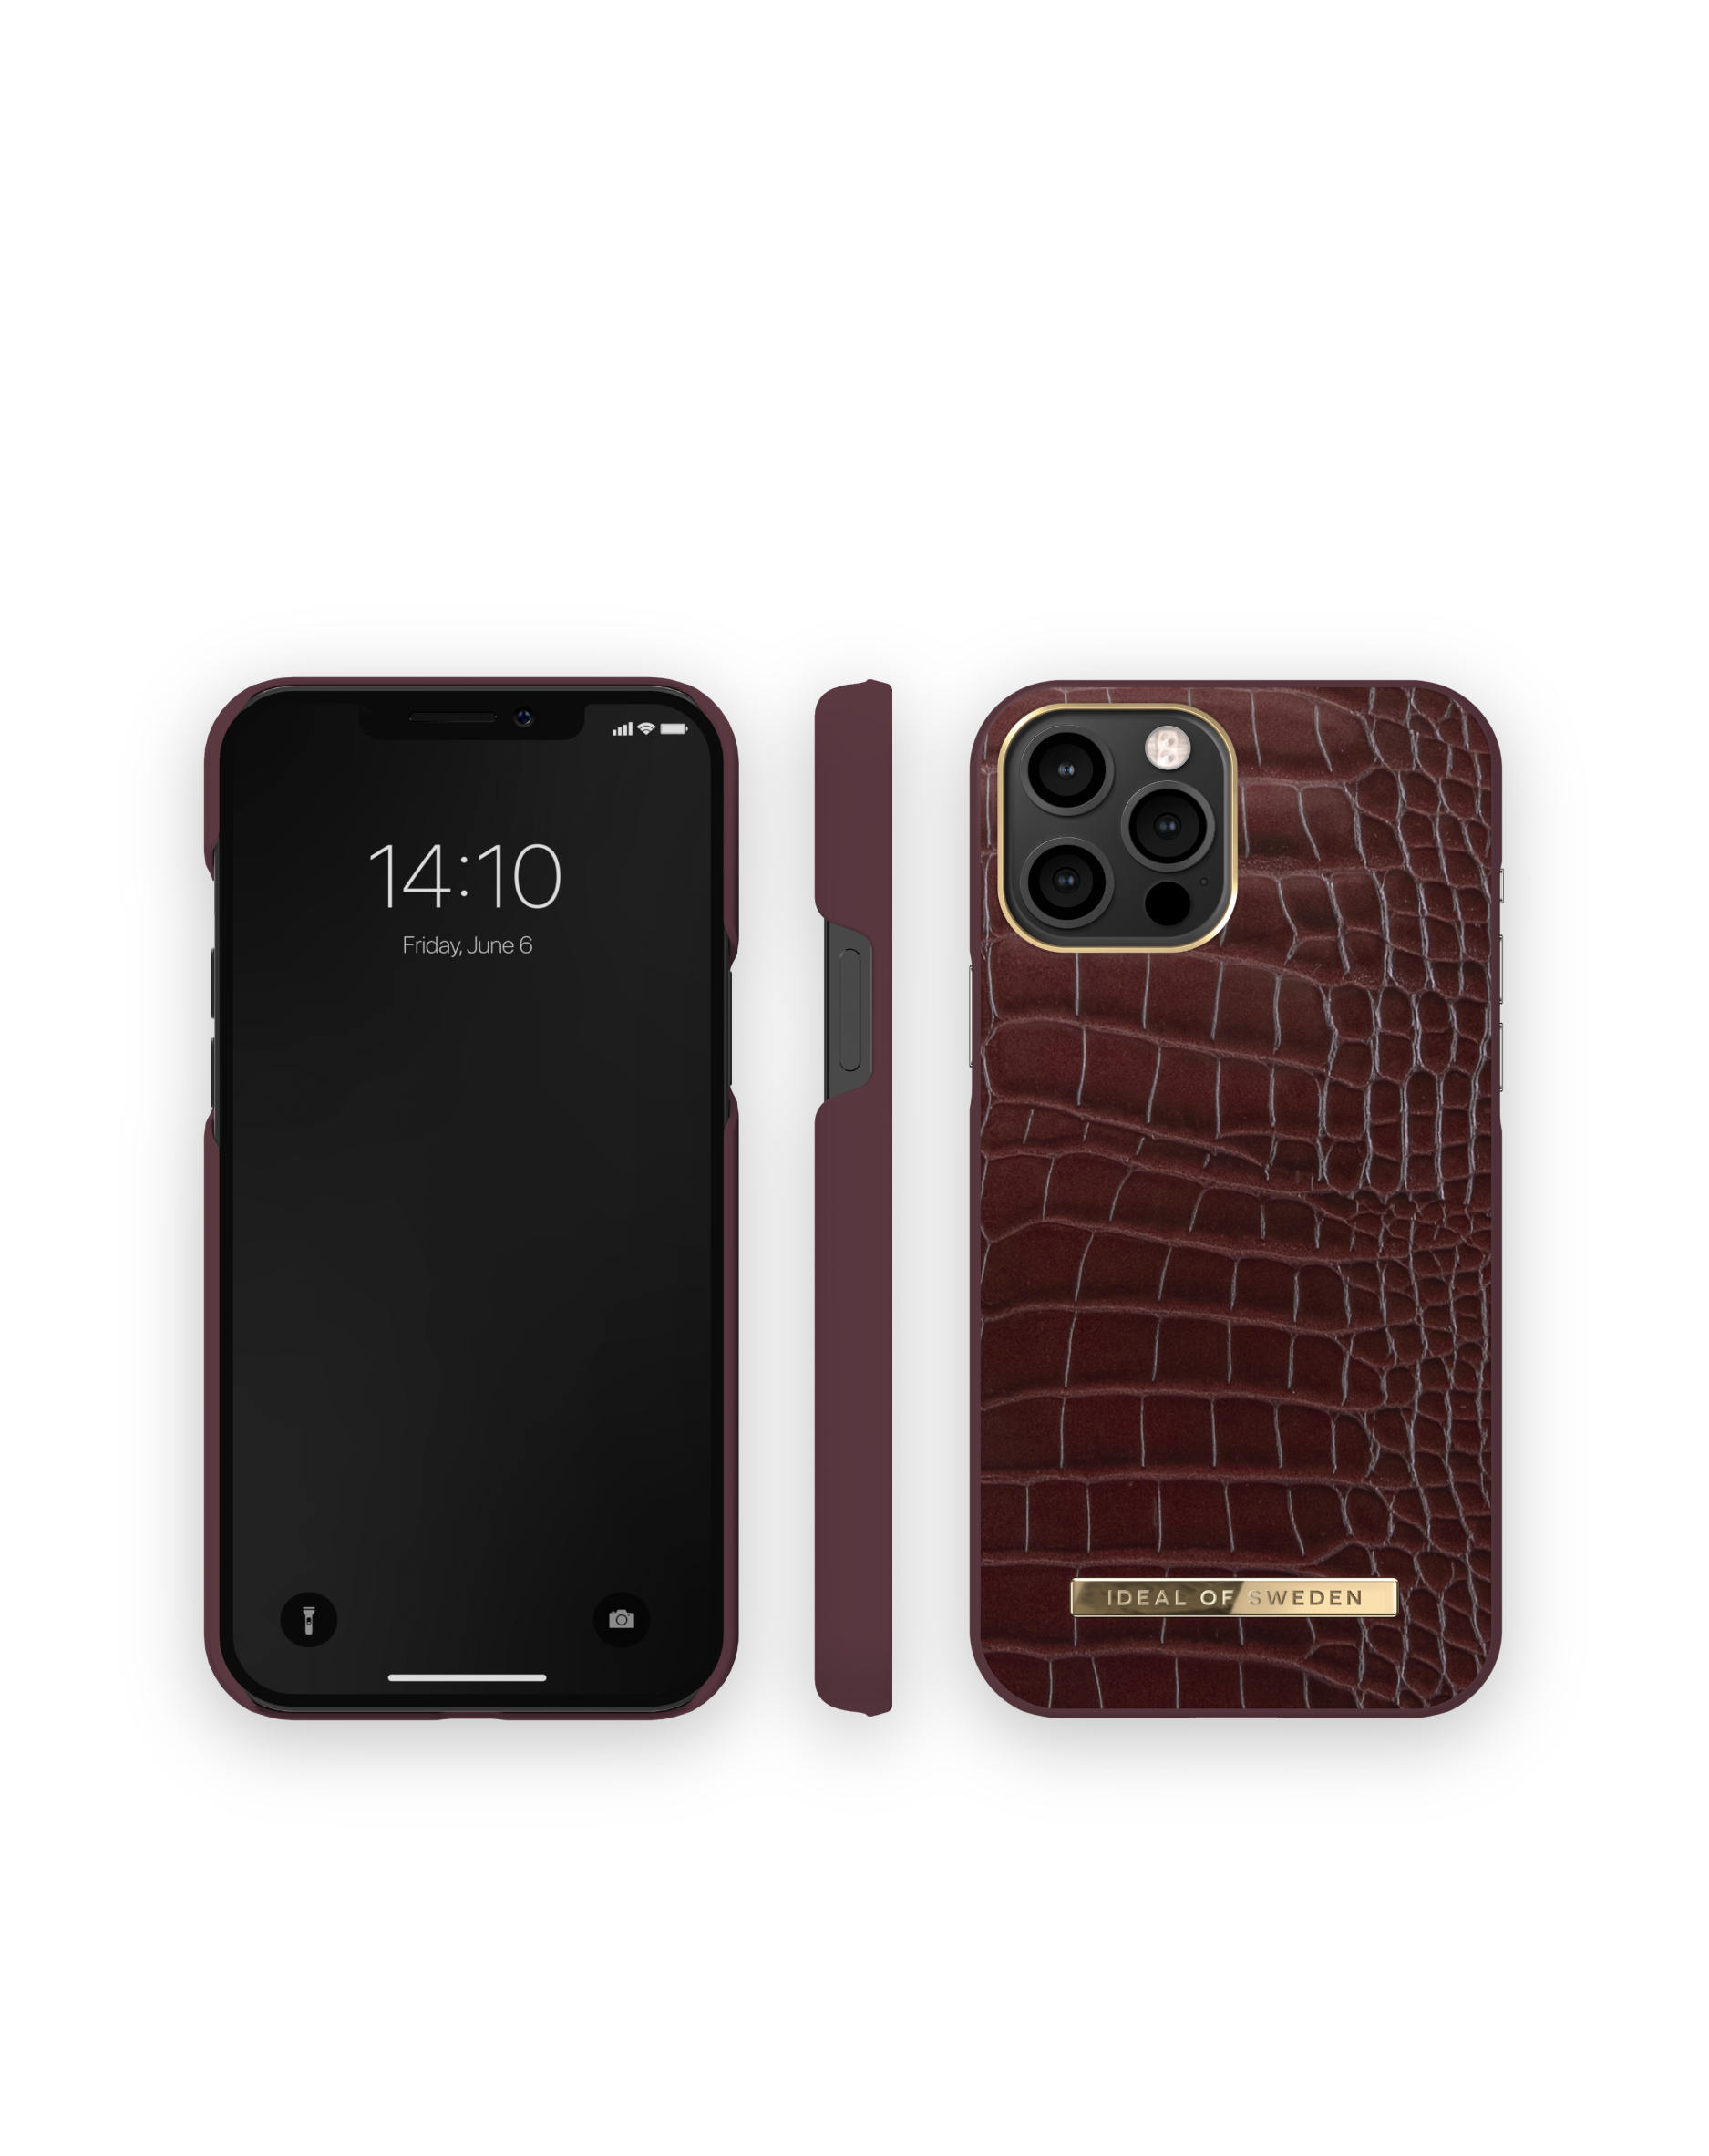 Croco 12/12 SWEDEN OF Backcover, Apple, Scarlet iPhone IDEAL Pro, IDACAW21-I2061-326,